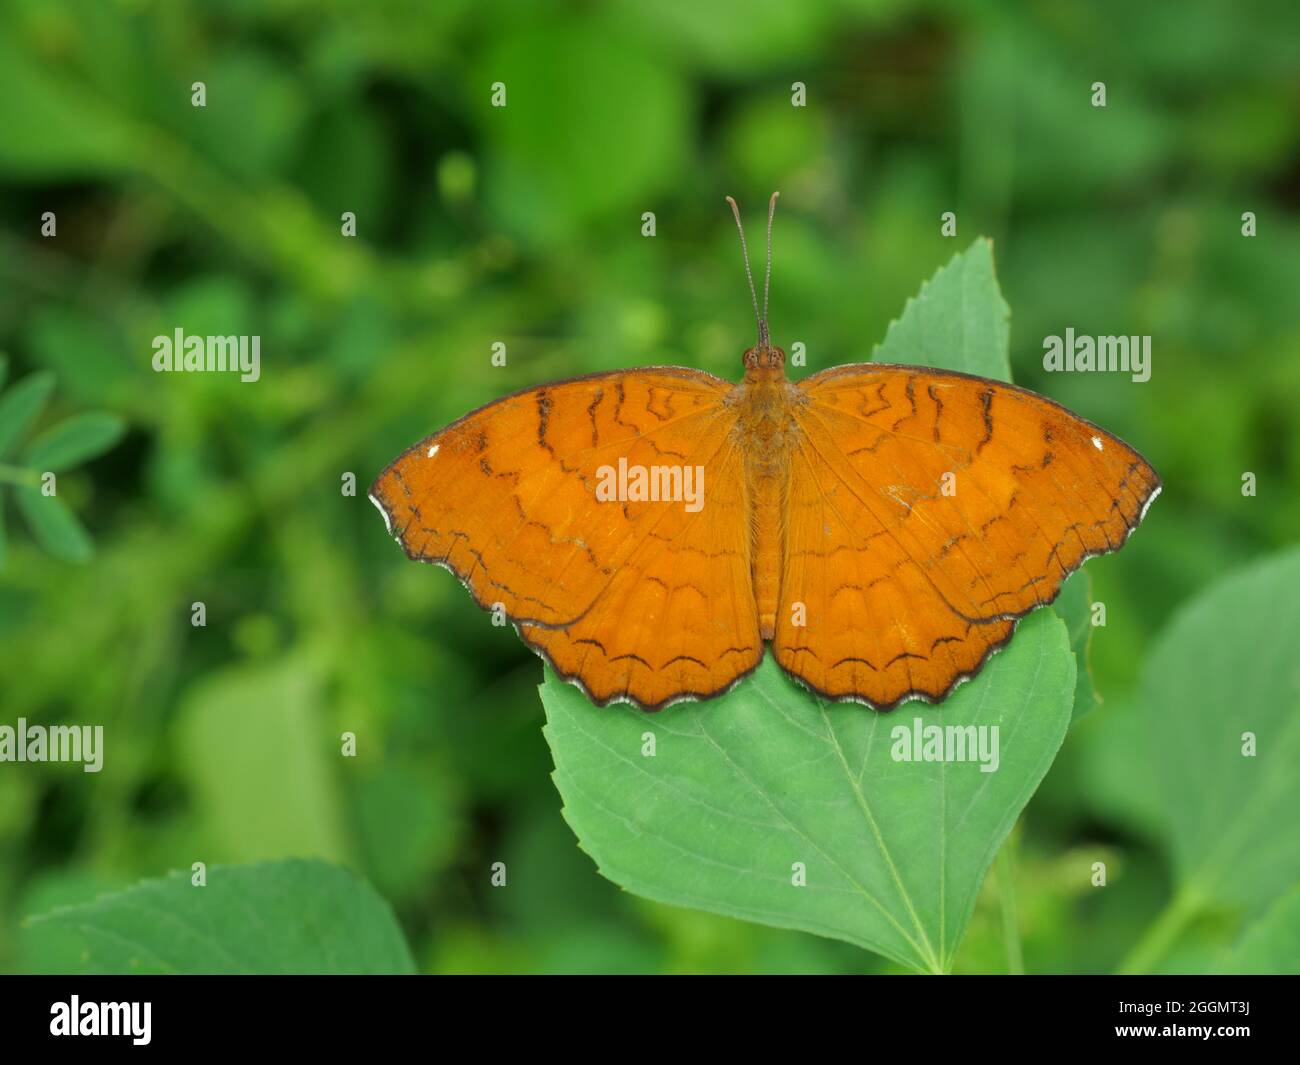 The Angled Castor Butterfly on leaf with natural green background, Orange and brown stripes and white spots on tropical insect wings, Thailand Stock Photo